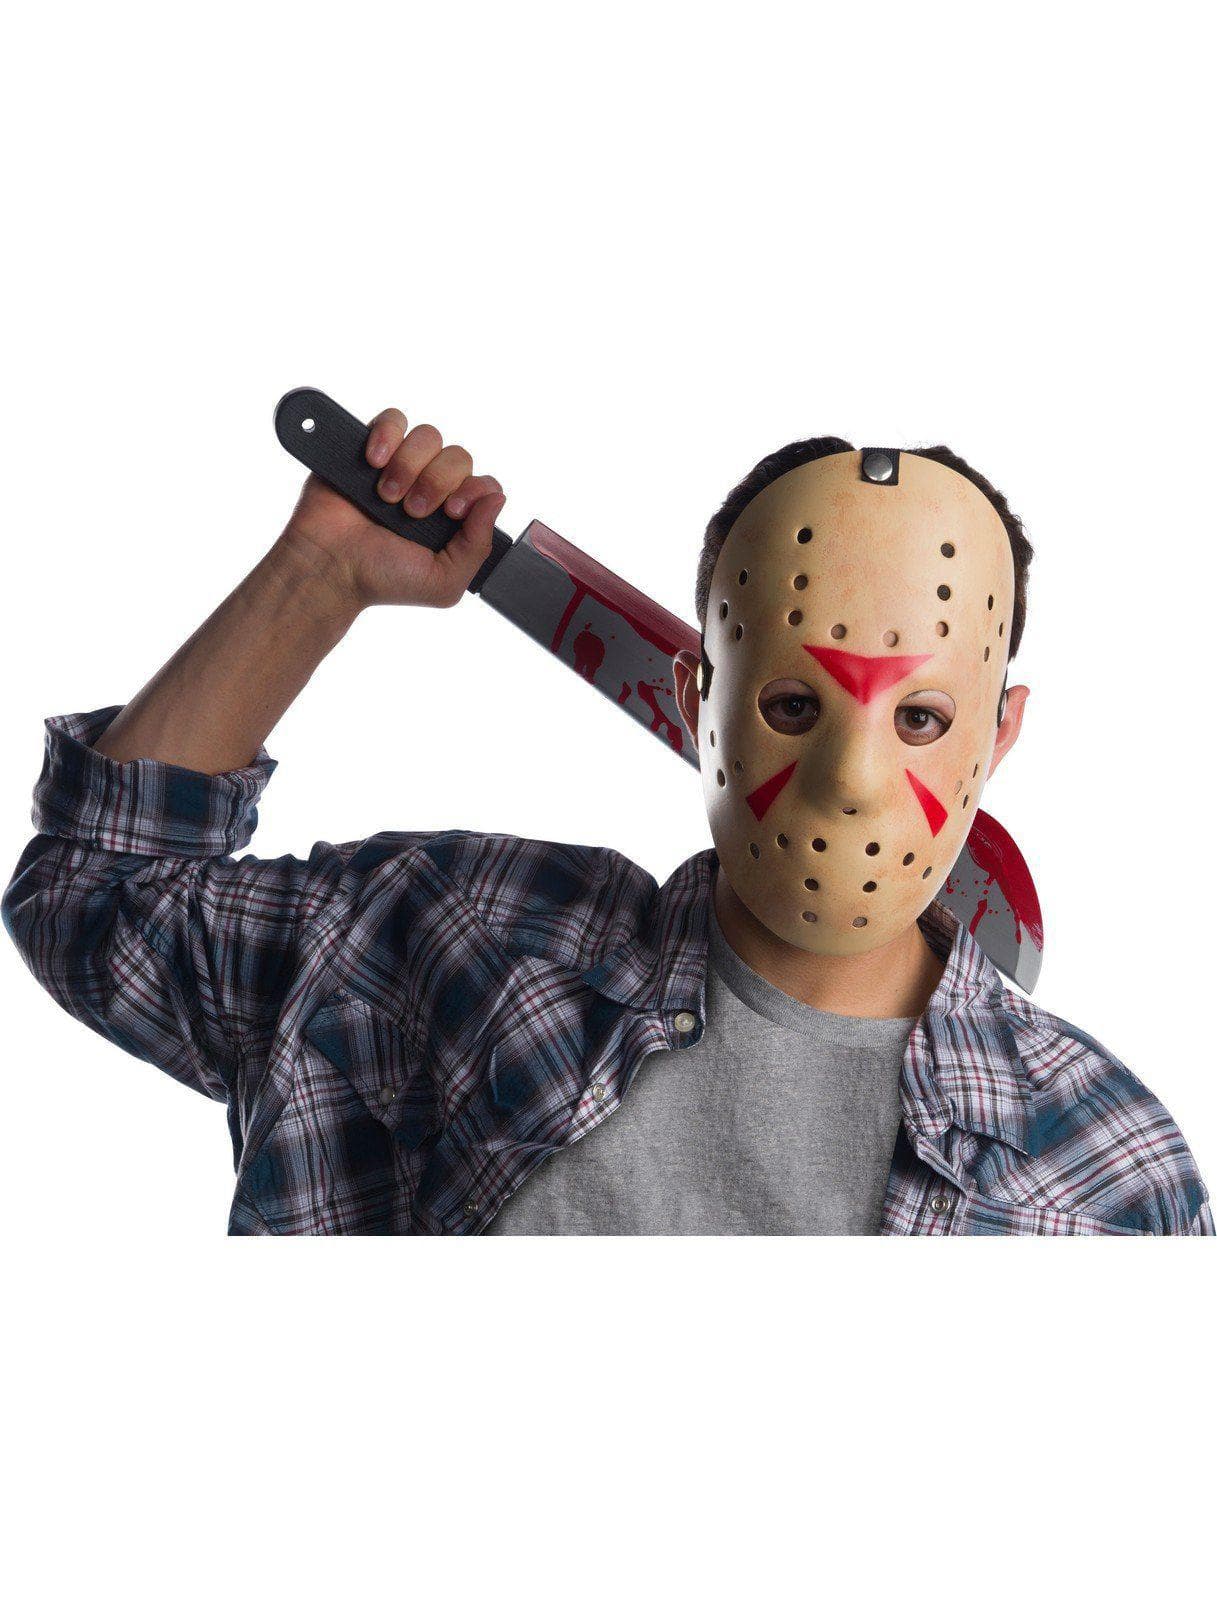 Adult Friday the 13th Jason Voorhees Hockey Half Mask - Deluxe - costumes.com